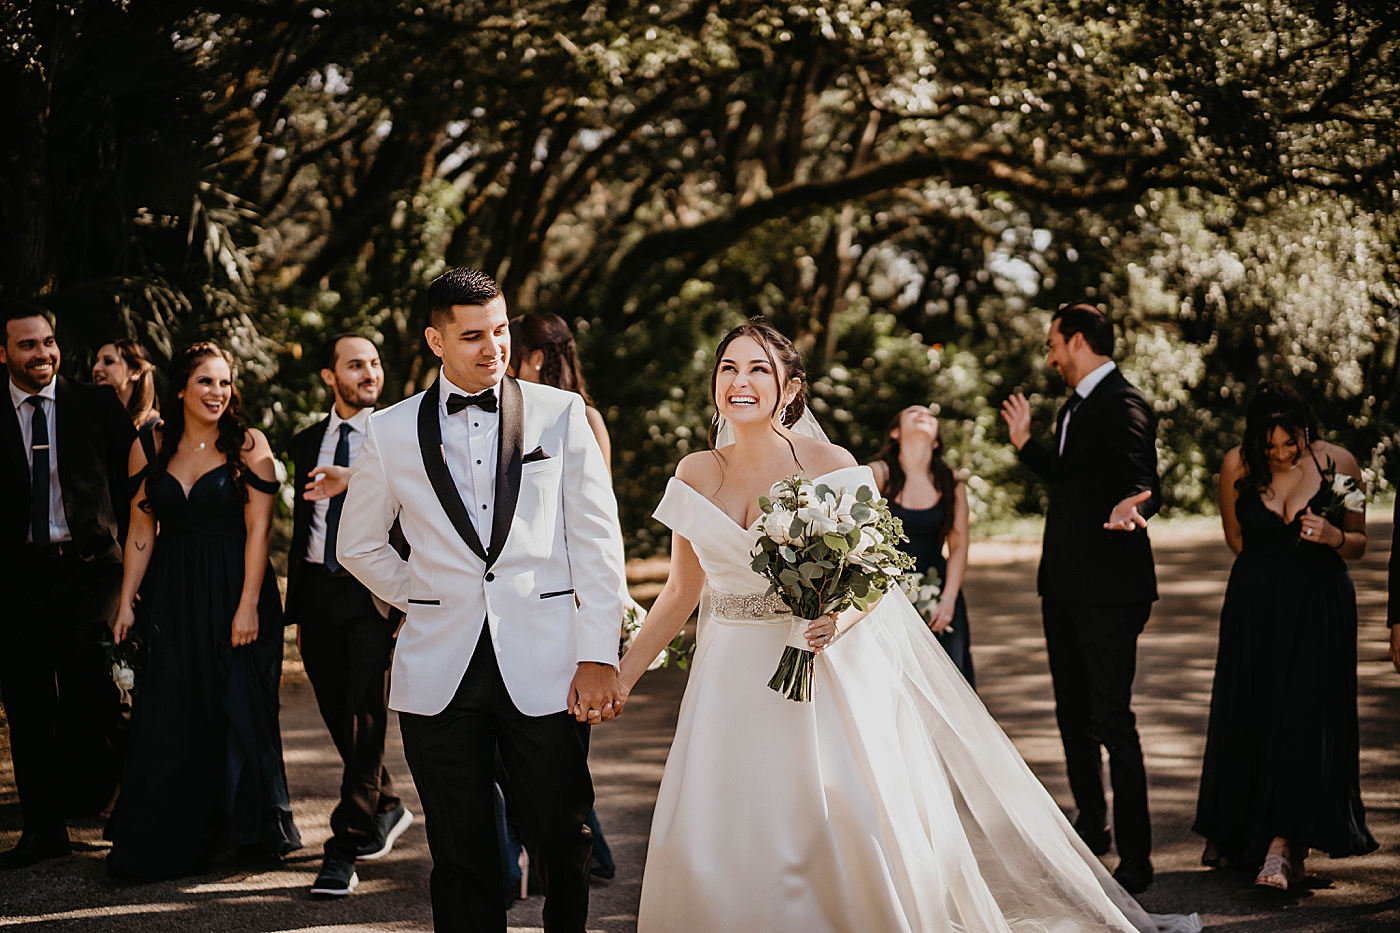 Bride and Groom holding hands with Wedding party behind them Lavan Venue Wedding Photography captured by South Florida Wedding Photographer Krystal Capone Photography